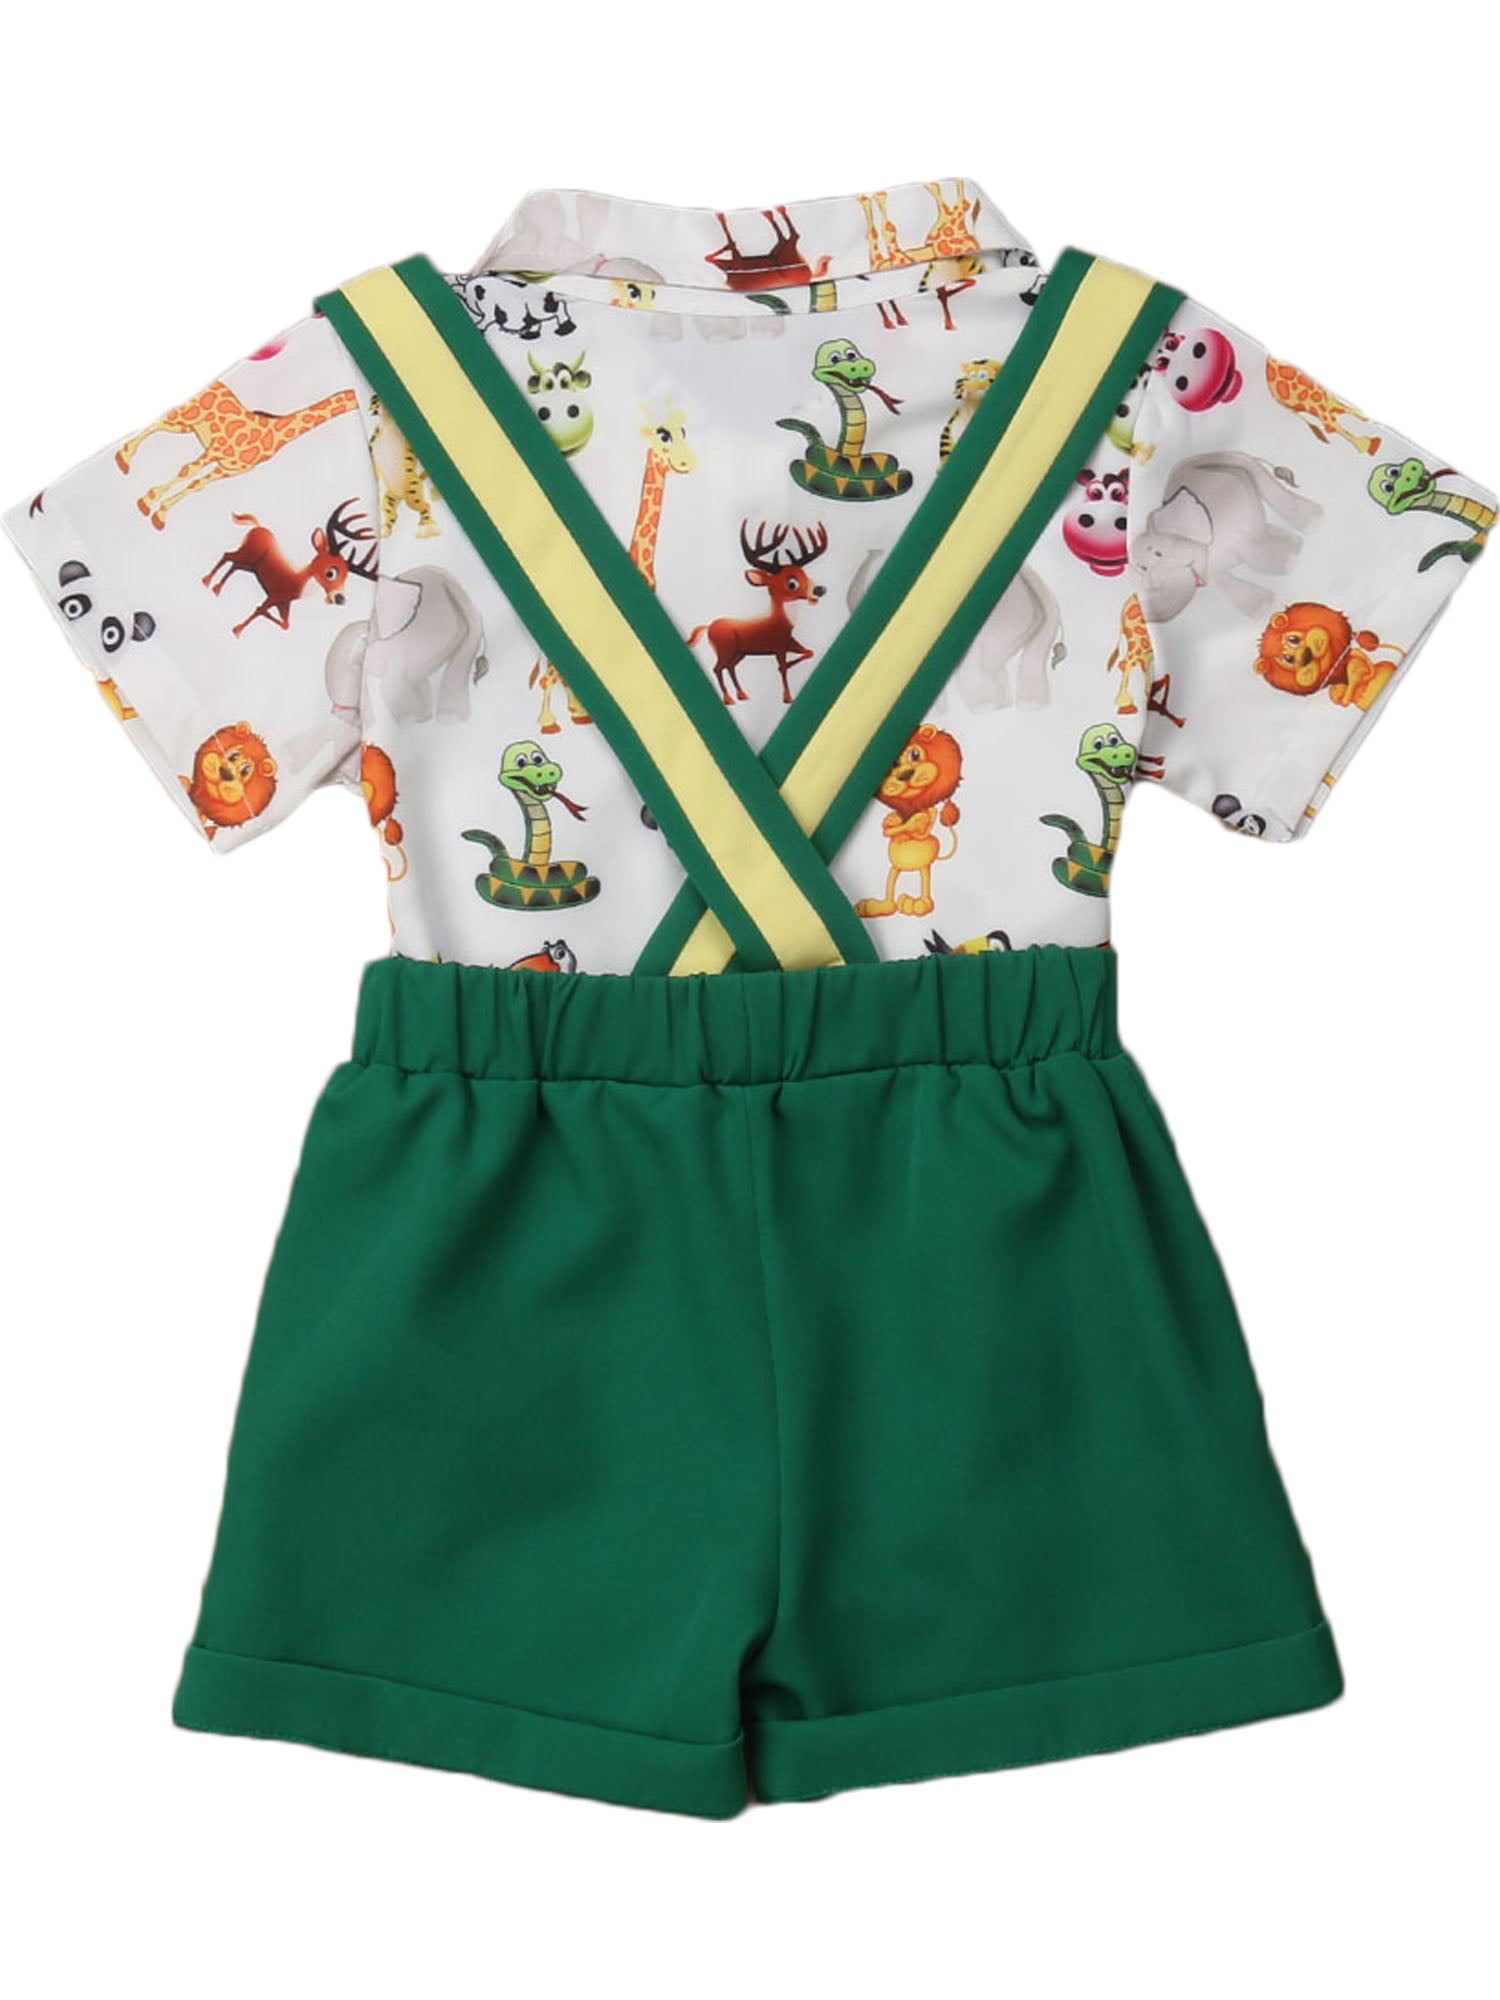 Details about   Newborn Baby Boys 2PCS Shirt+Shorts Sets Formal Outfits Fashion Pageant Formal 